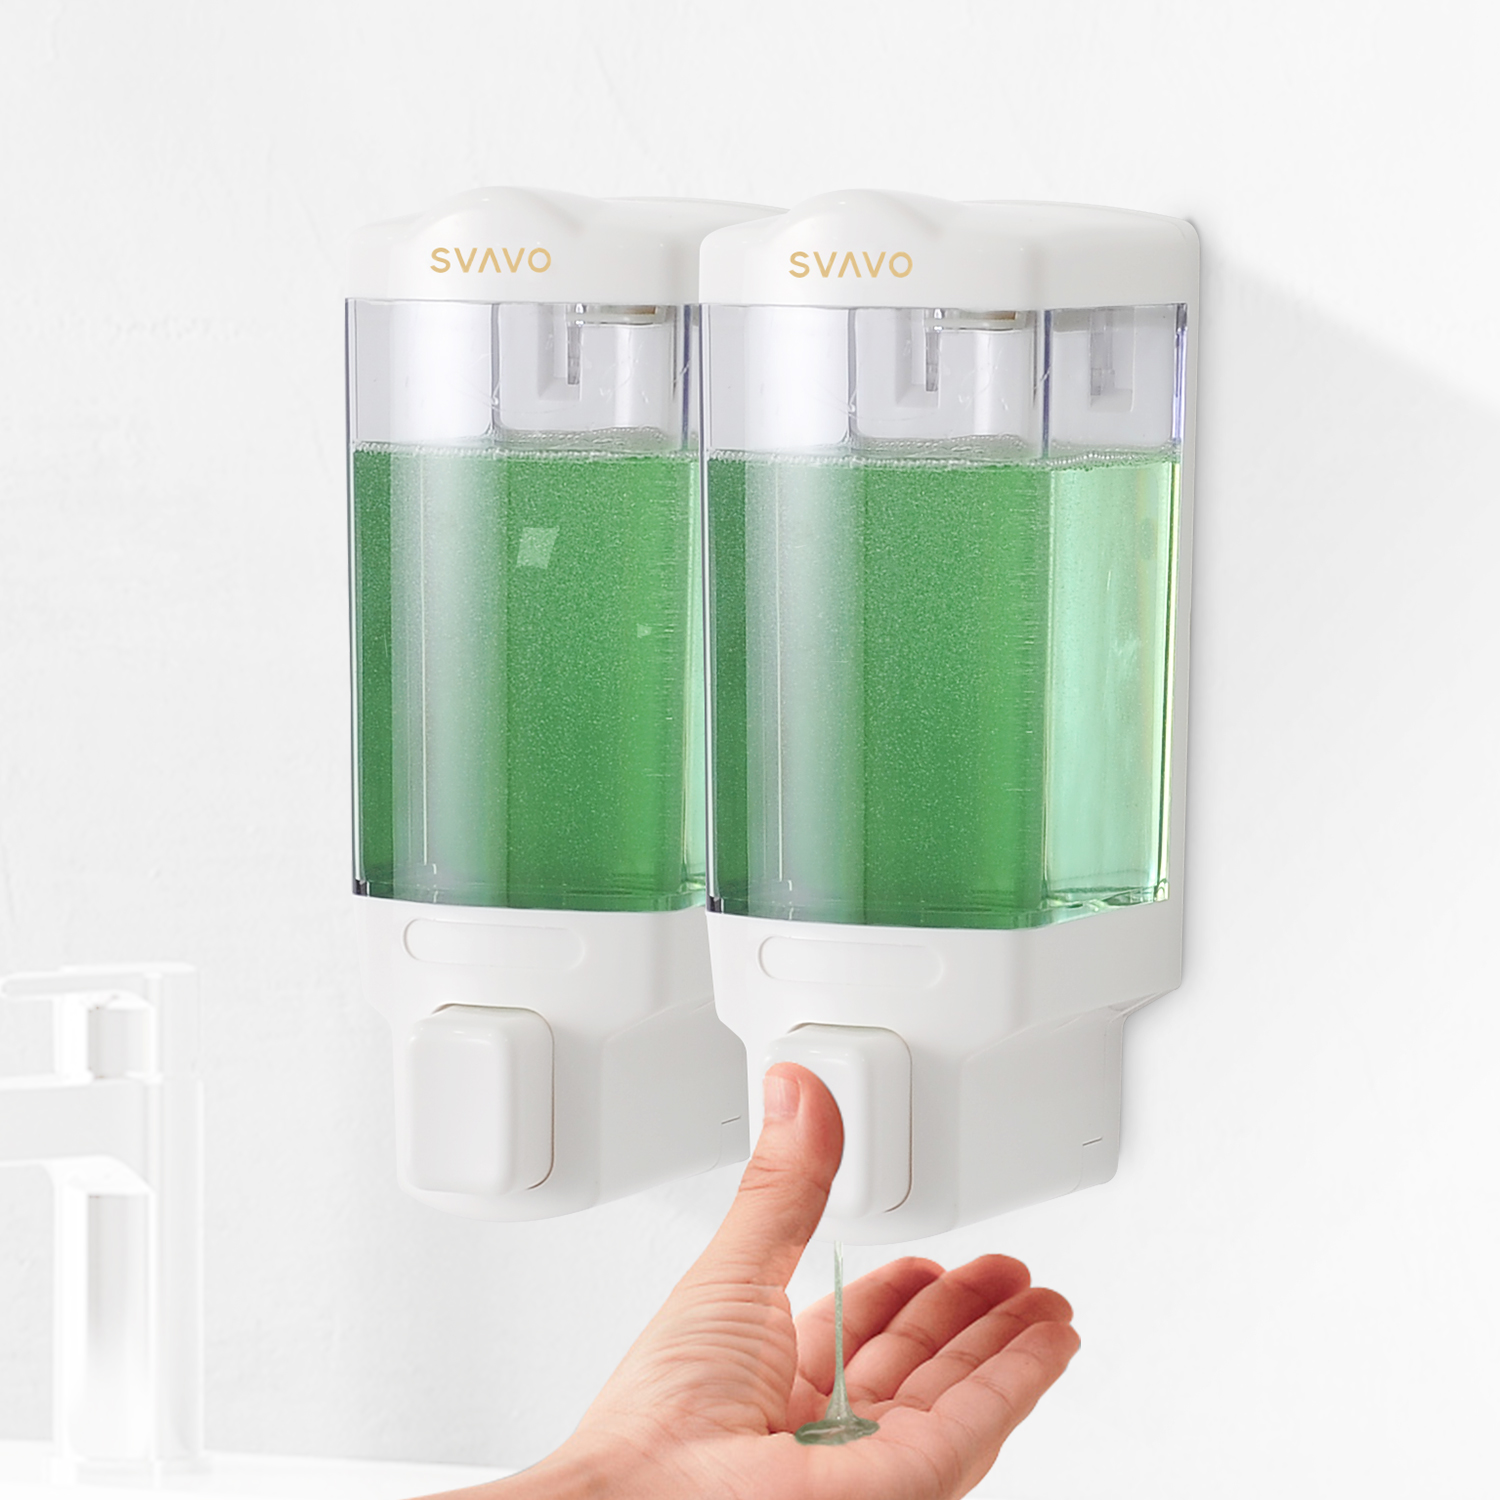 Double Shampoo and Soap Dispensers for Showers V-8122